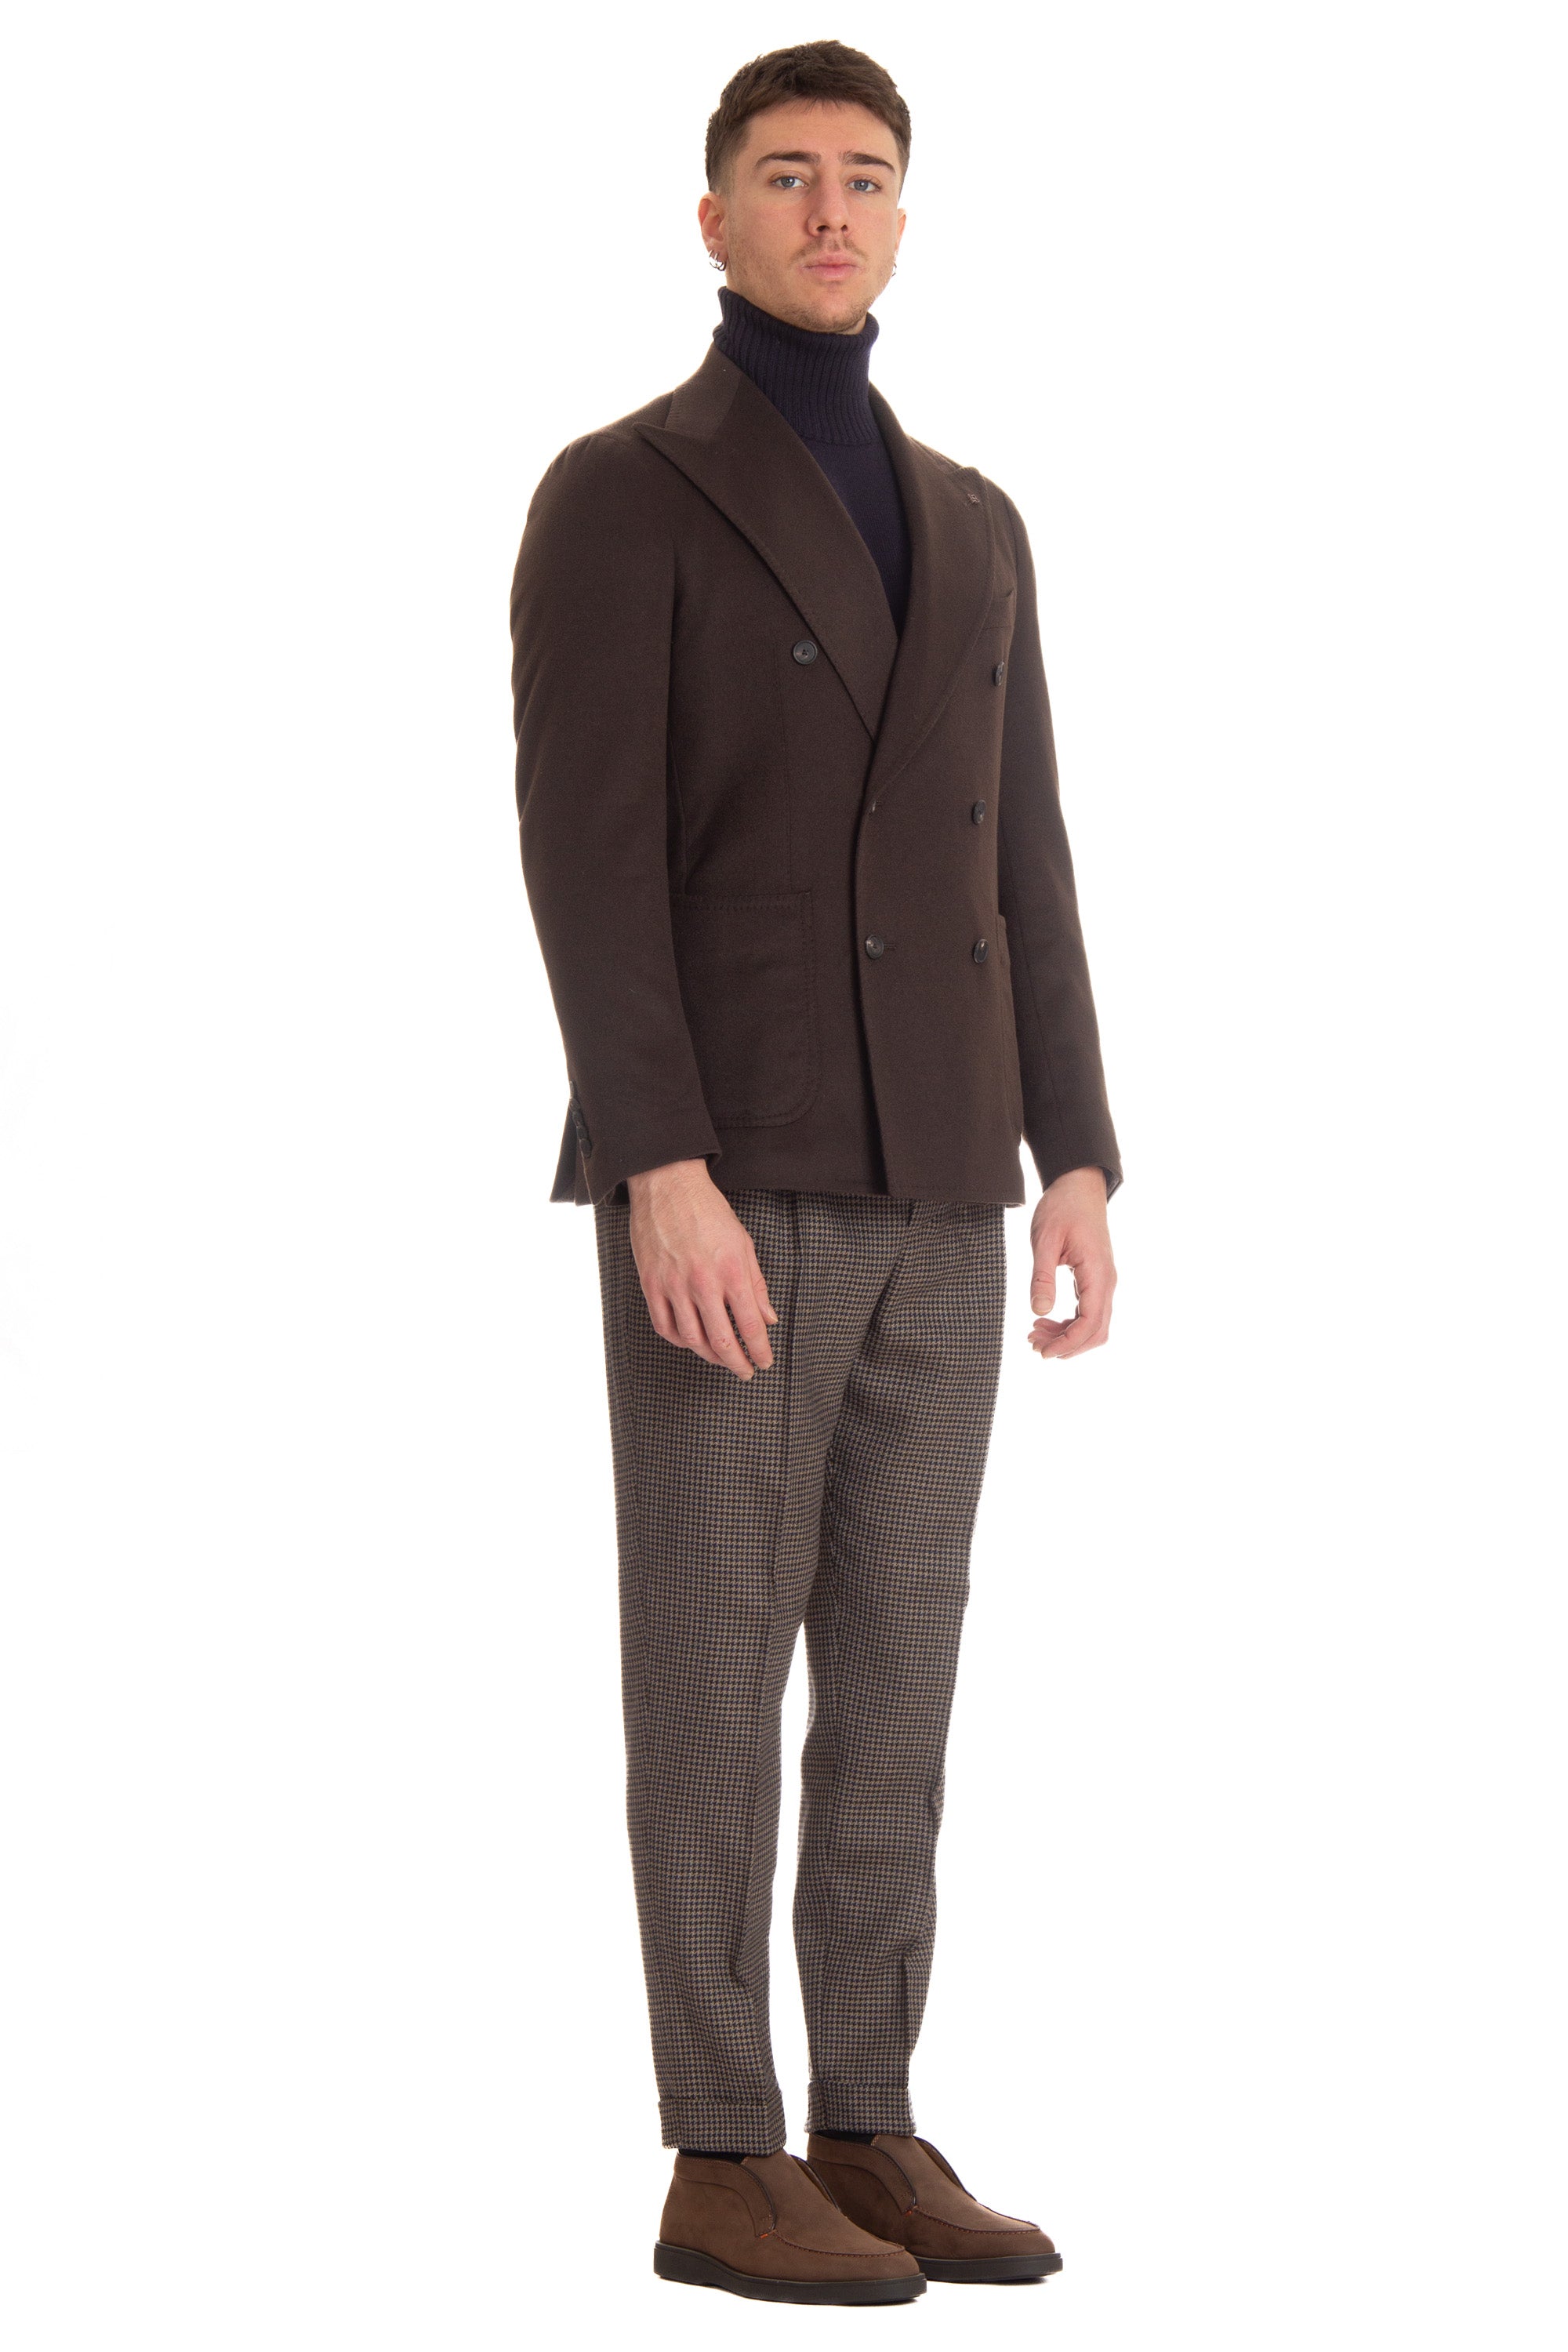 Double-breasted virgin wool jacket from the Pino Lerario line